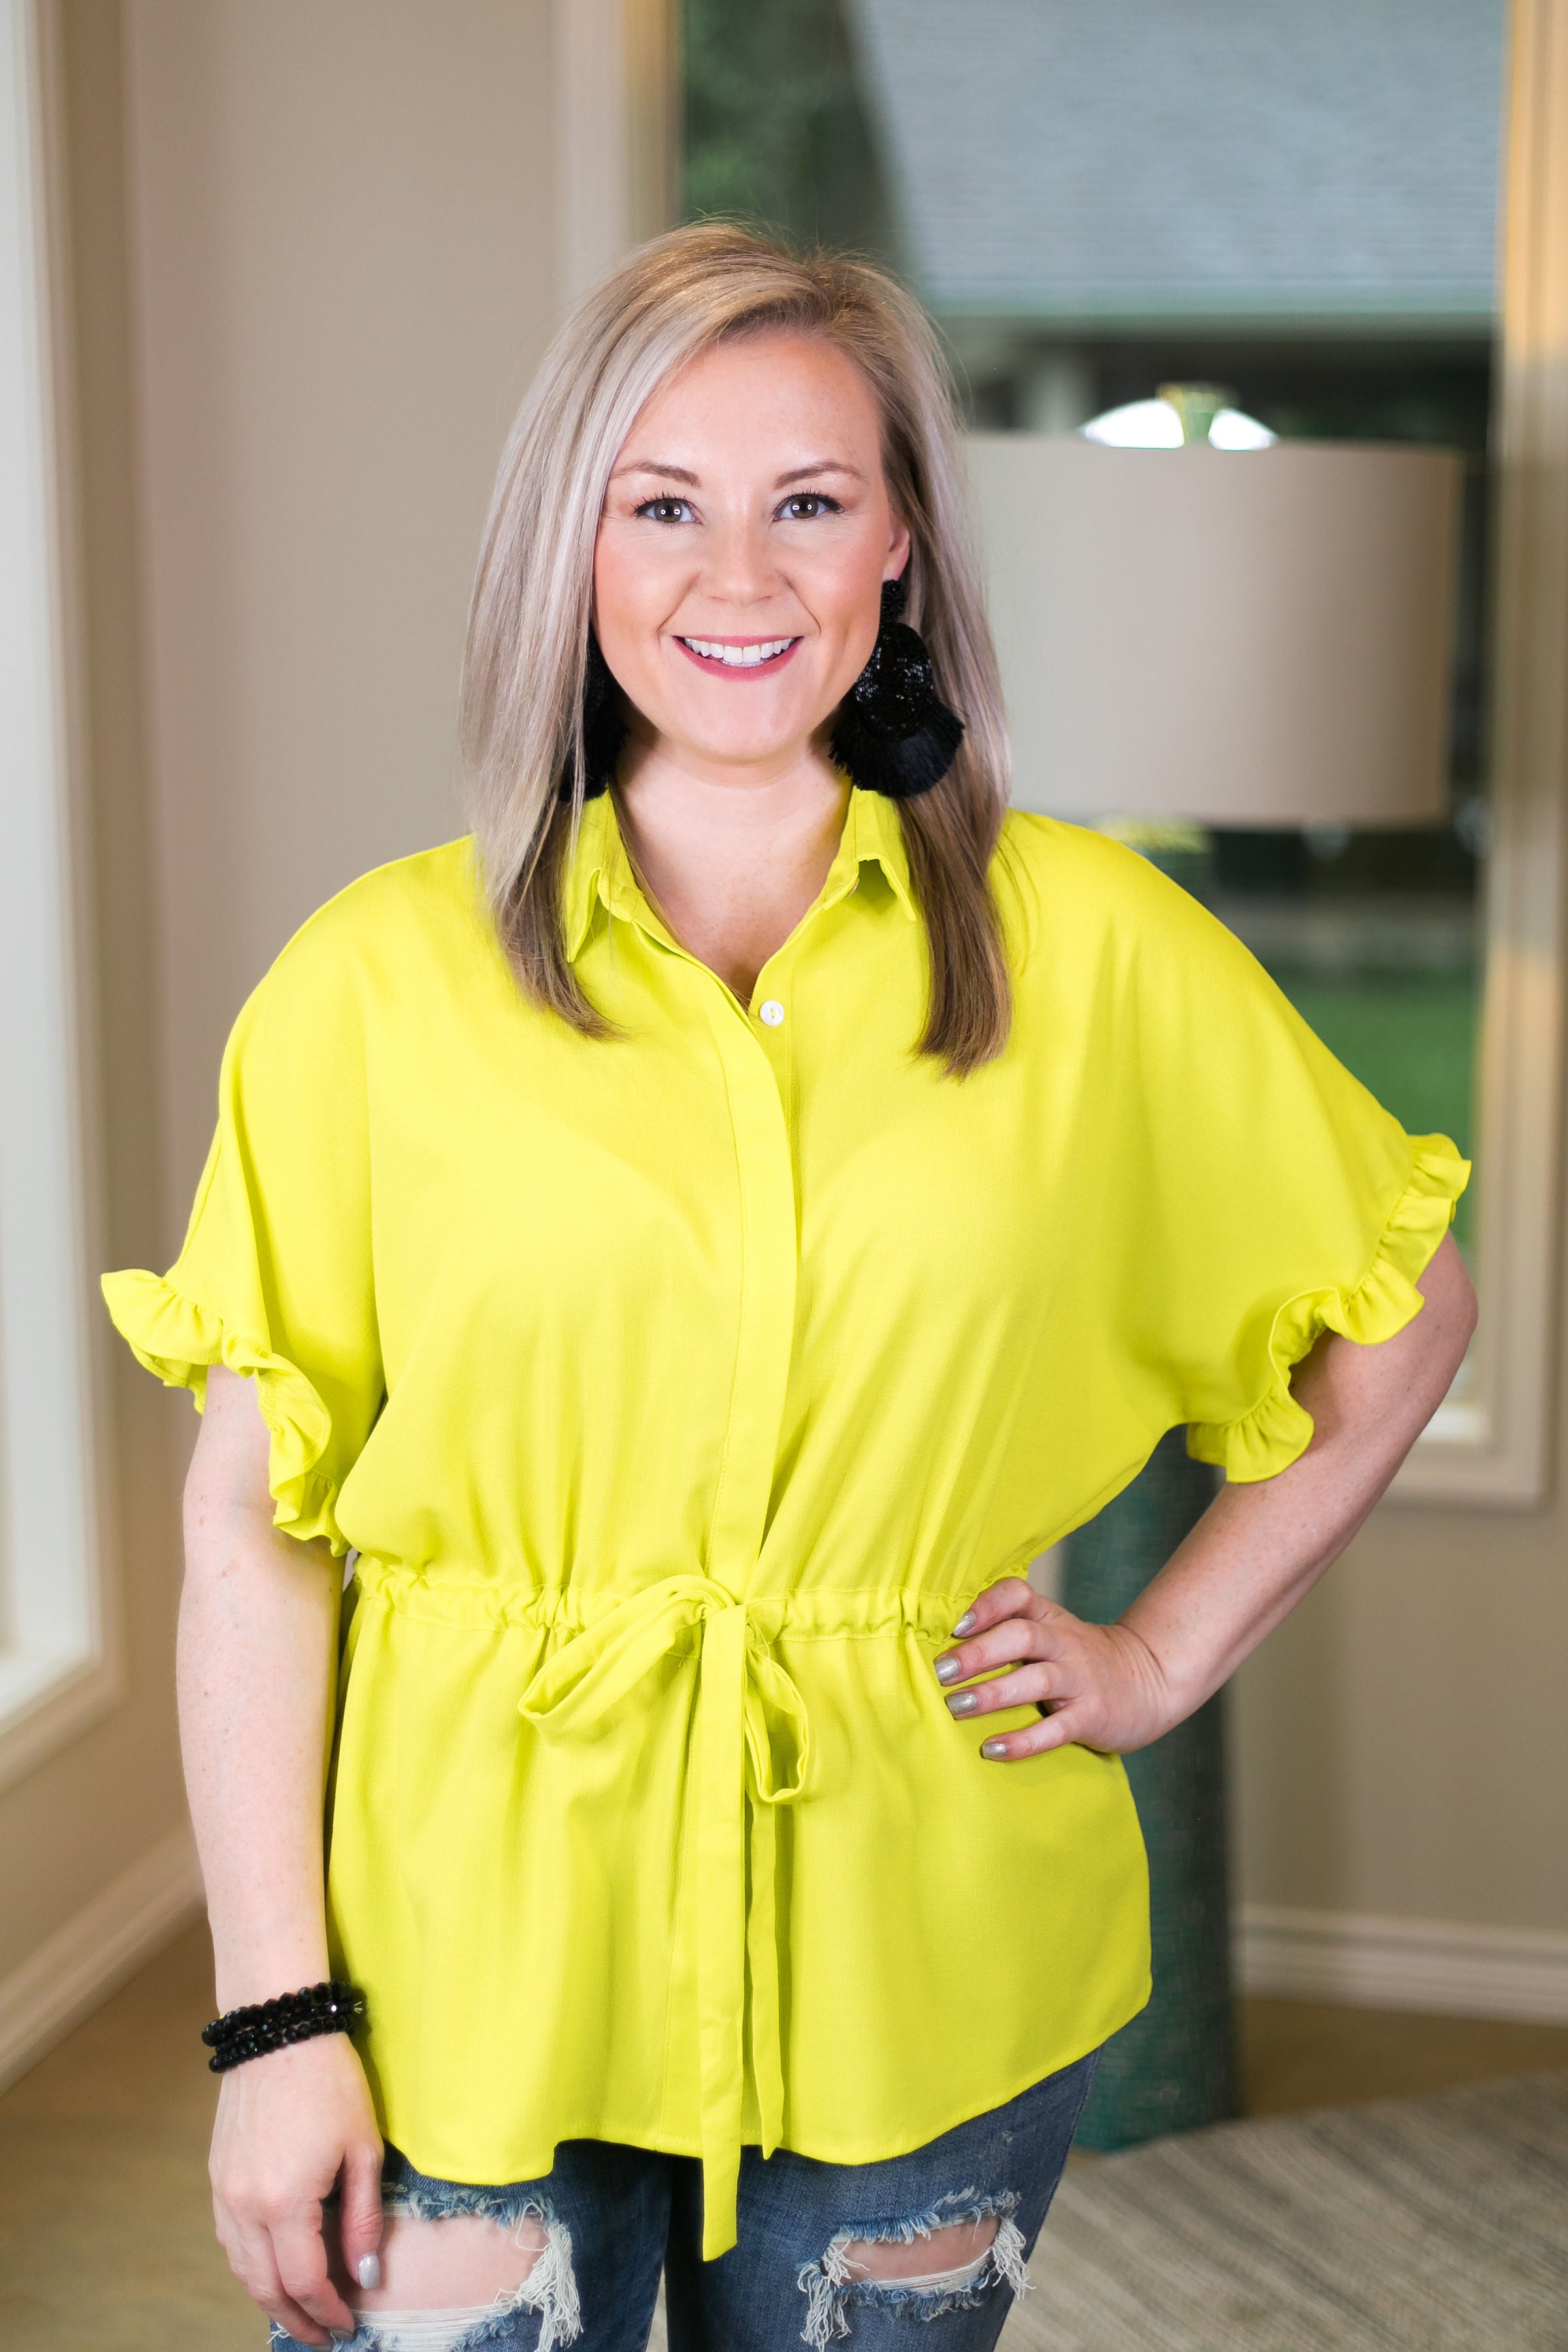 Last Chance Size Small | Double Take Button Down Top with Drawstring Waist and Ruffled Sleeves in Lime Green - Giddy Up Glamour Boutique